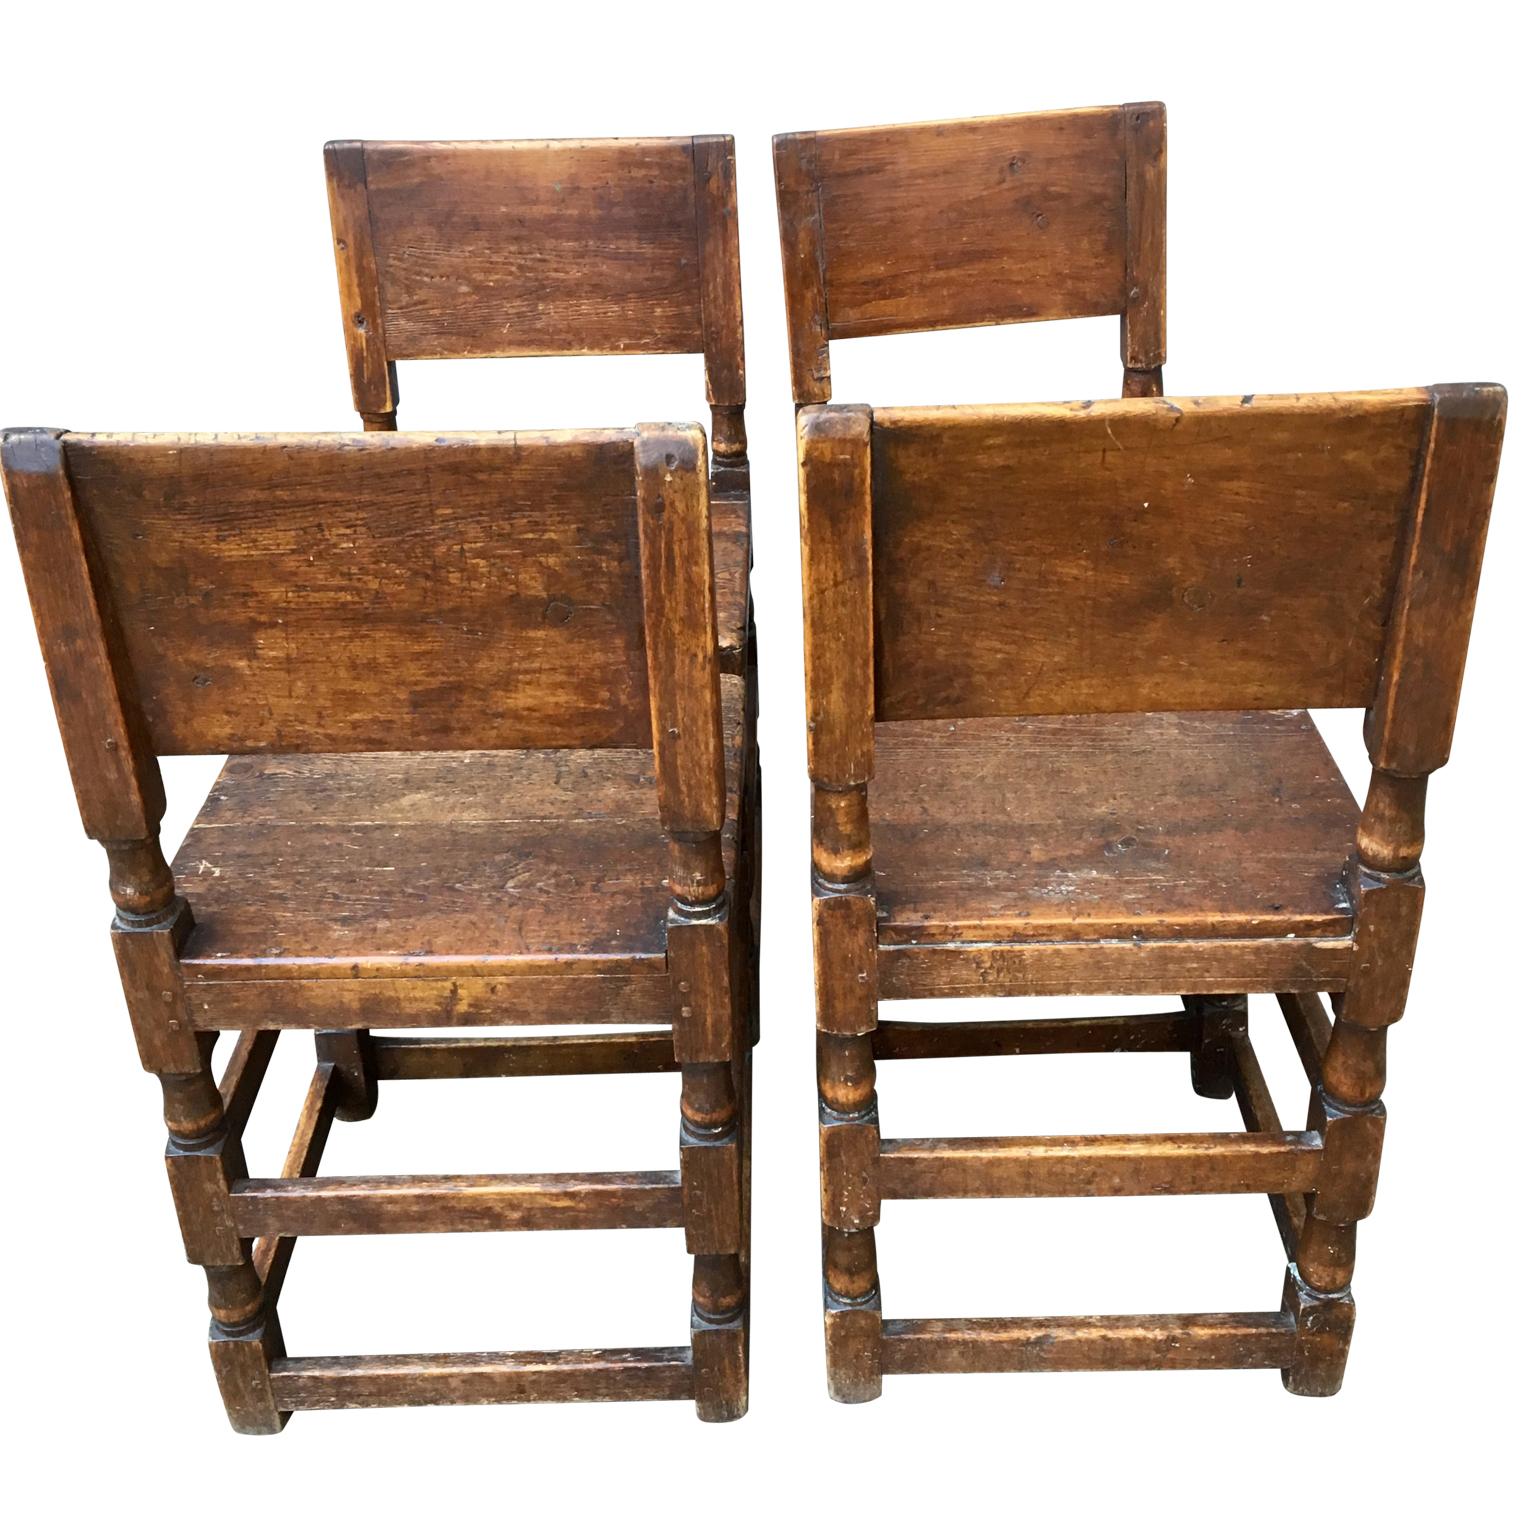 Hand-Crafted Set of Swedish Early 18th Century Folk Art Chairs